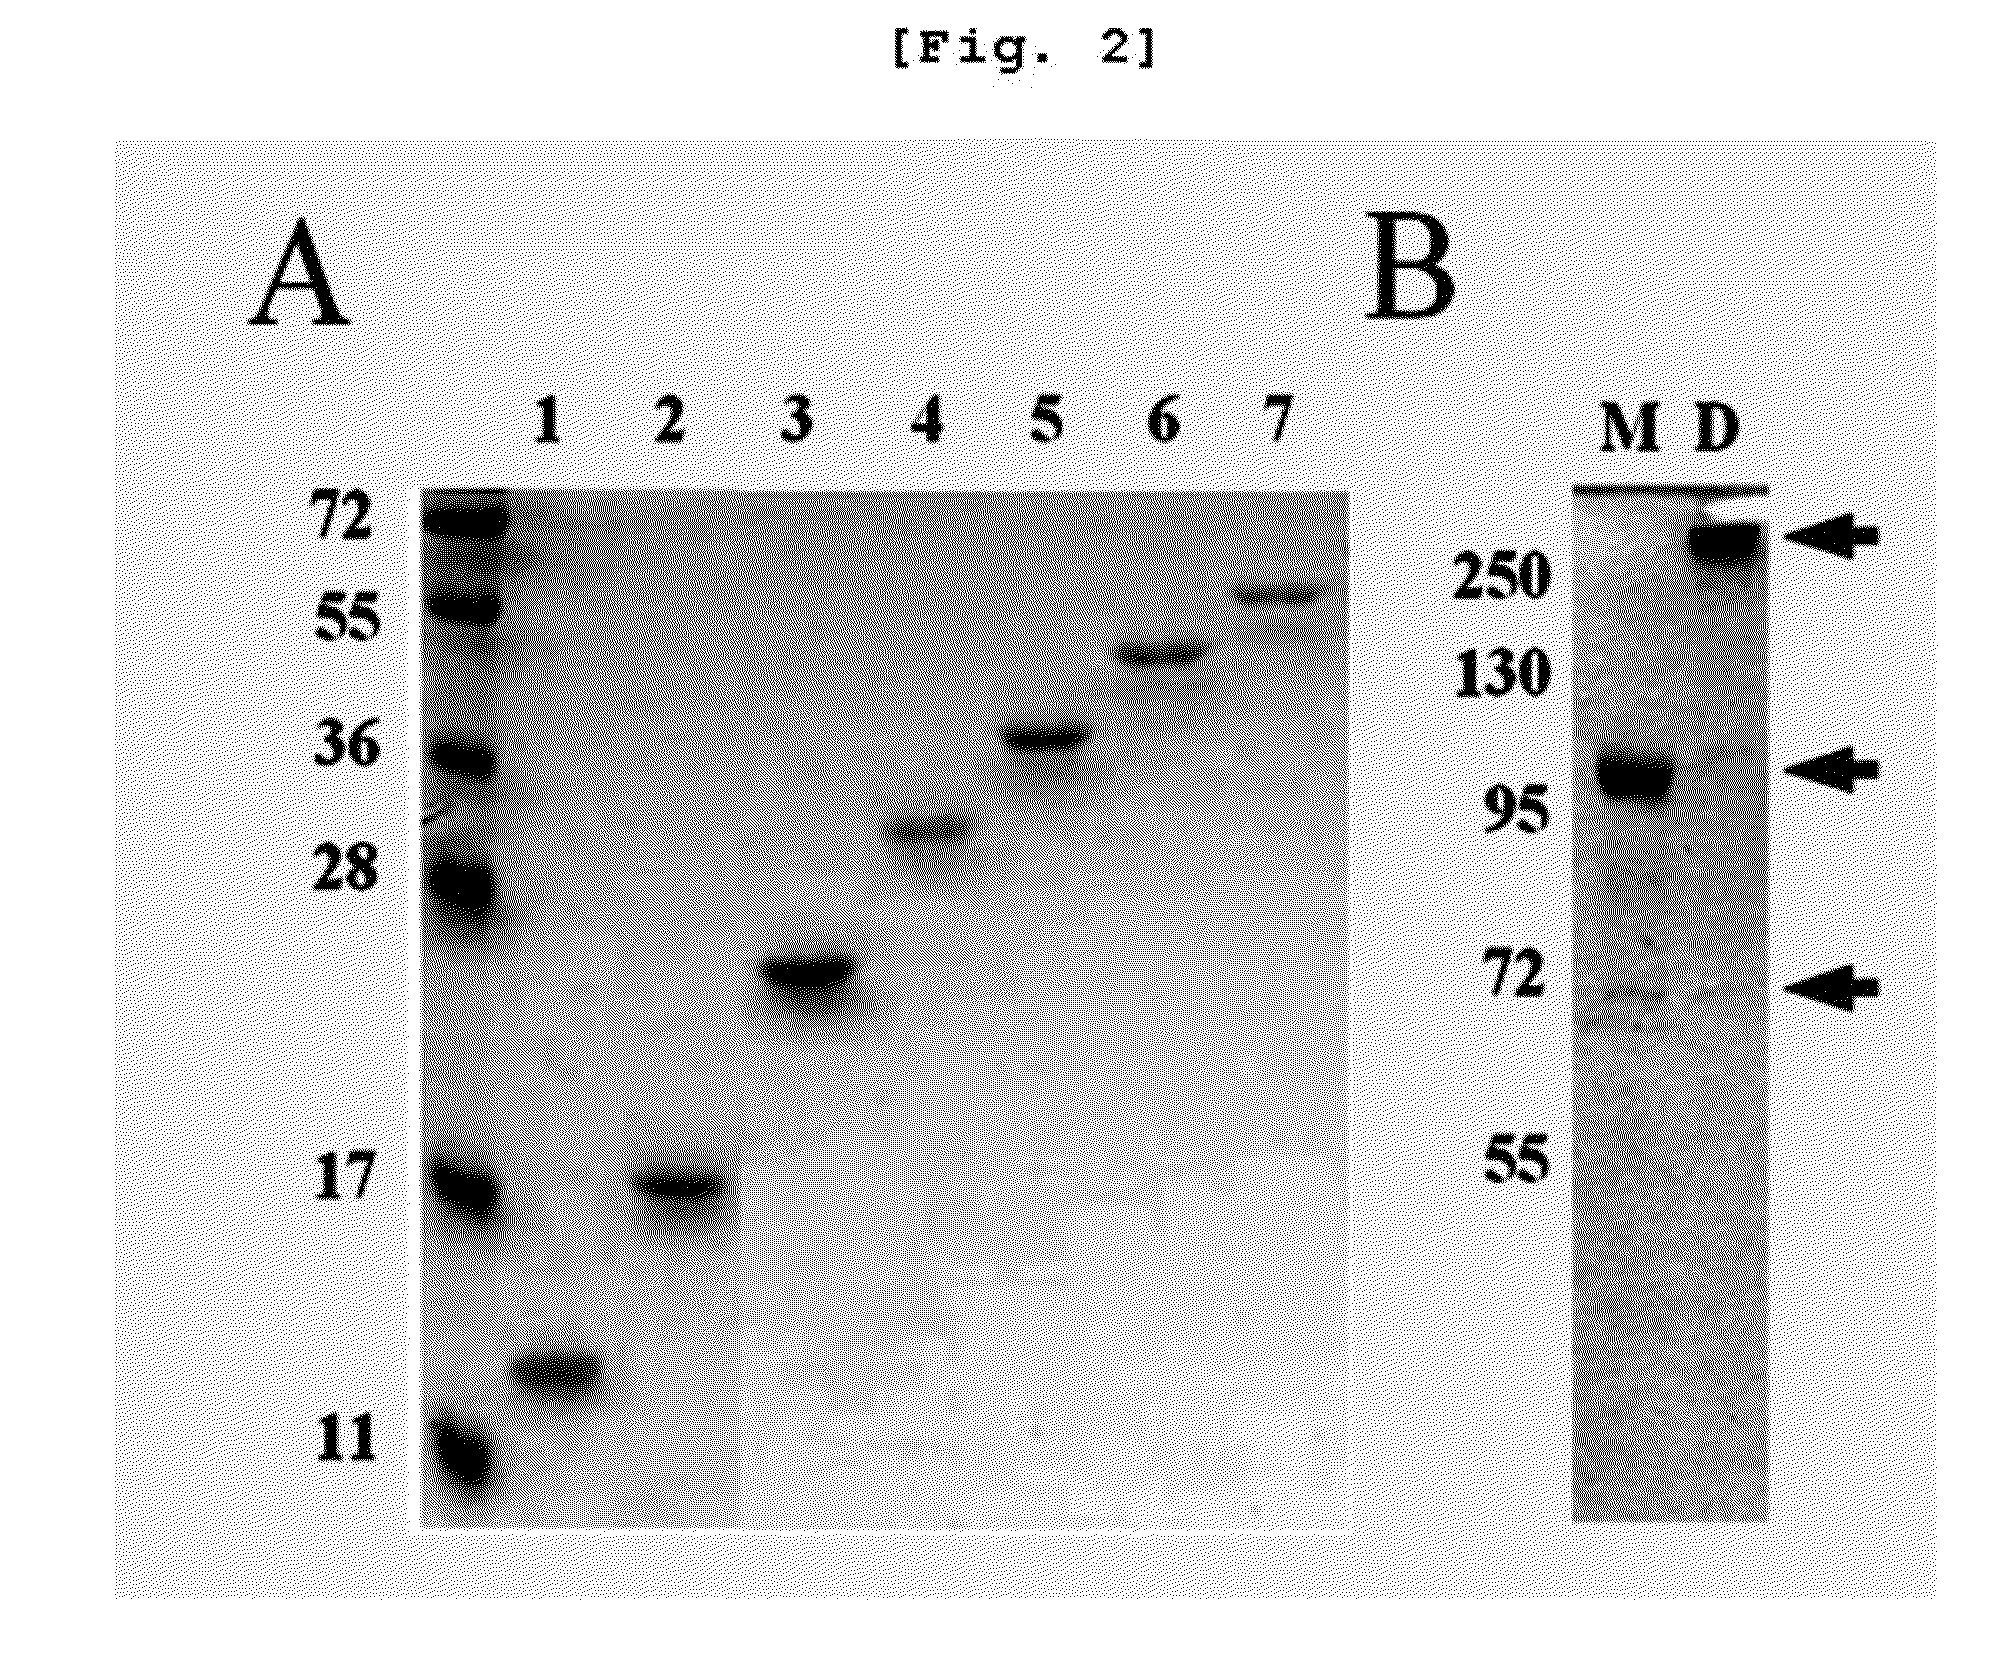 Method for manufacturing dimers and multimers by increasing the production of bond bridges in a complex of multiple monomers and repeating chains of an adherend of a type specifically adhering to monomers